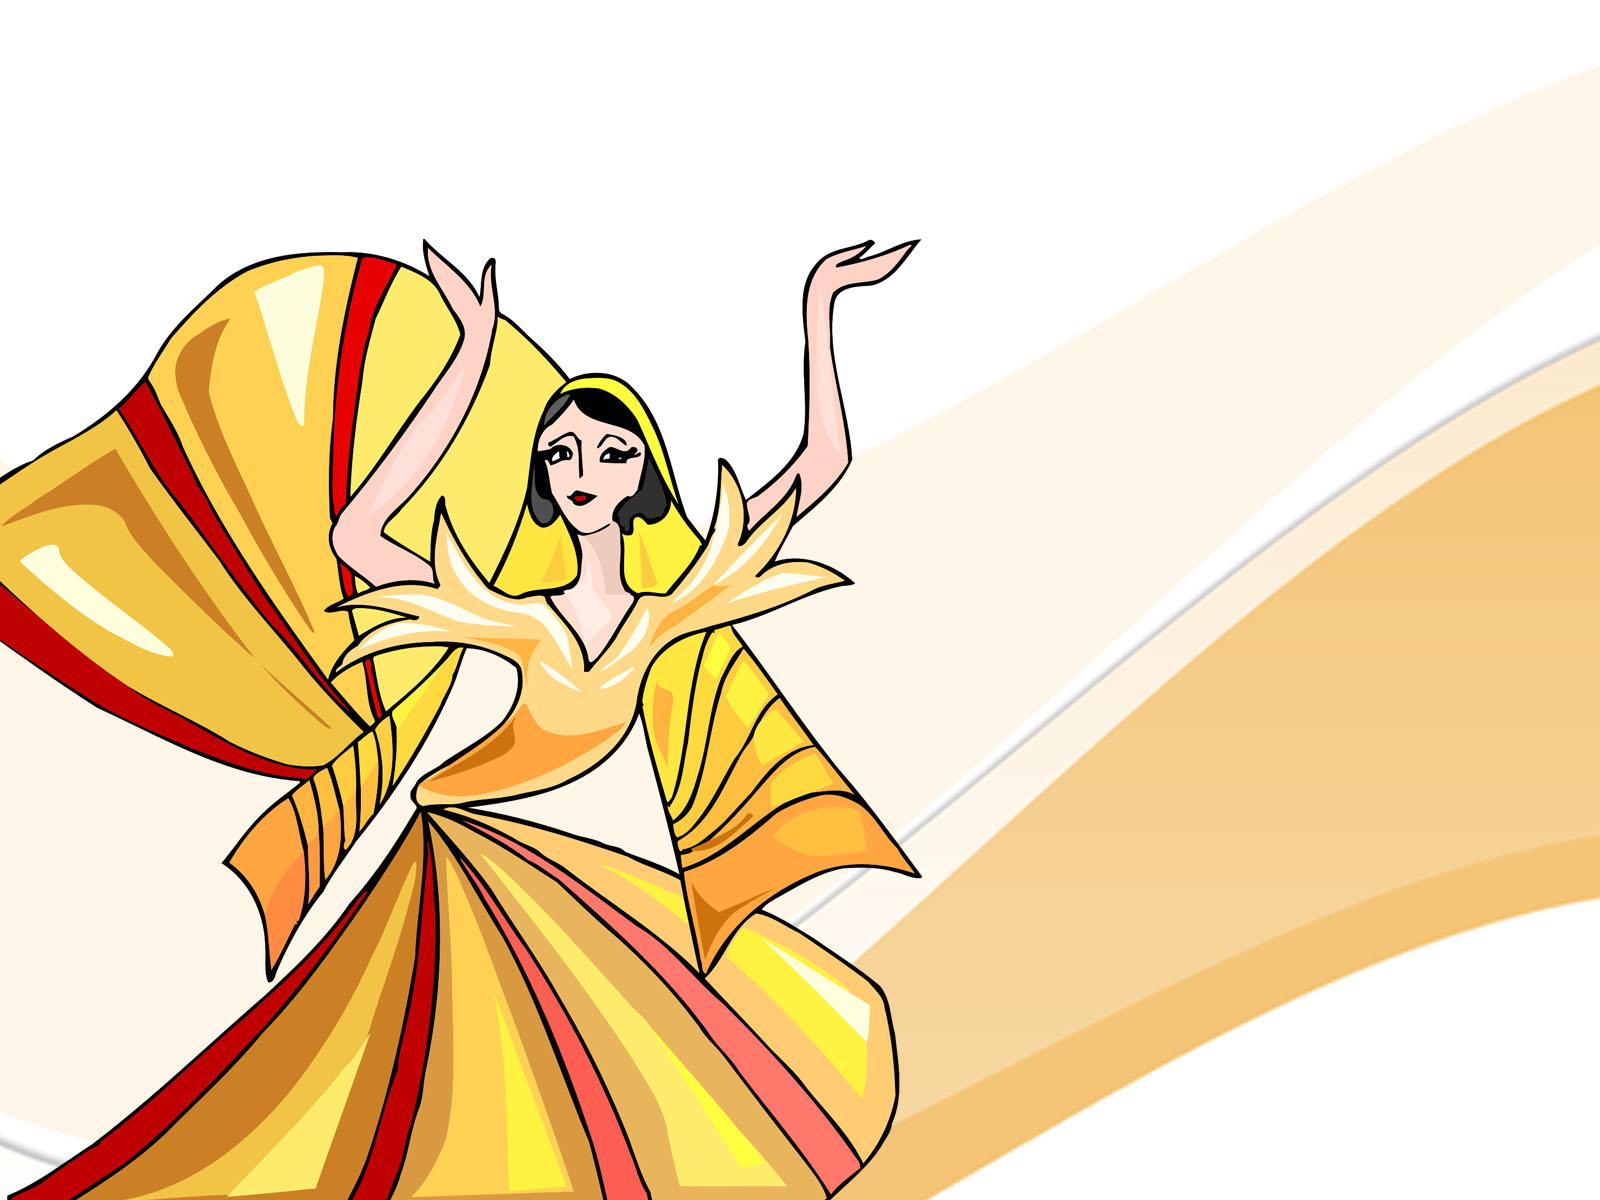 Dancer Character PPT Backgrounds